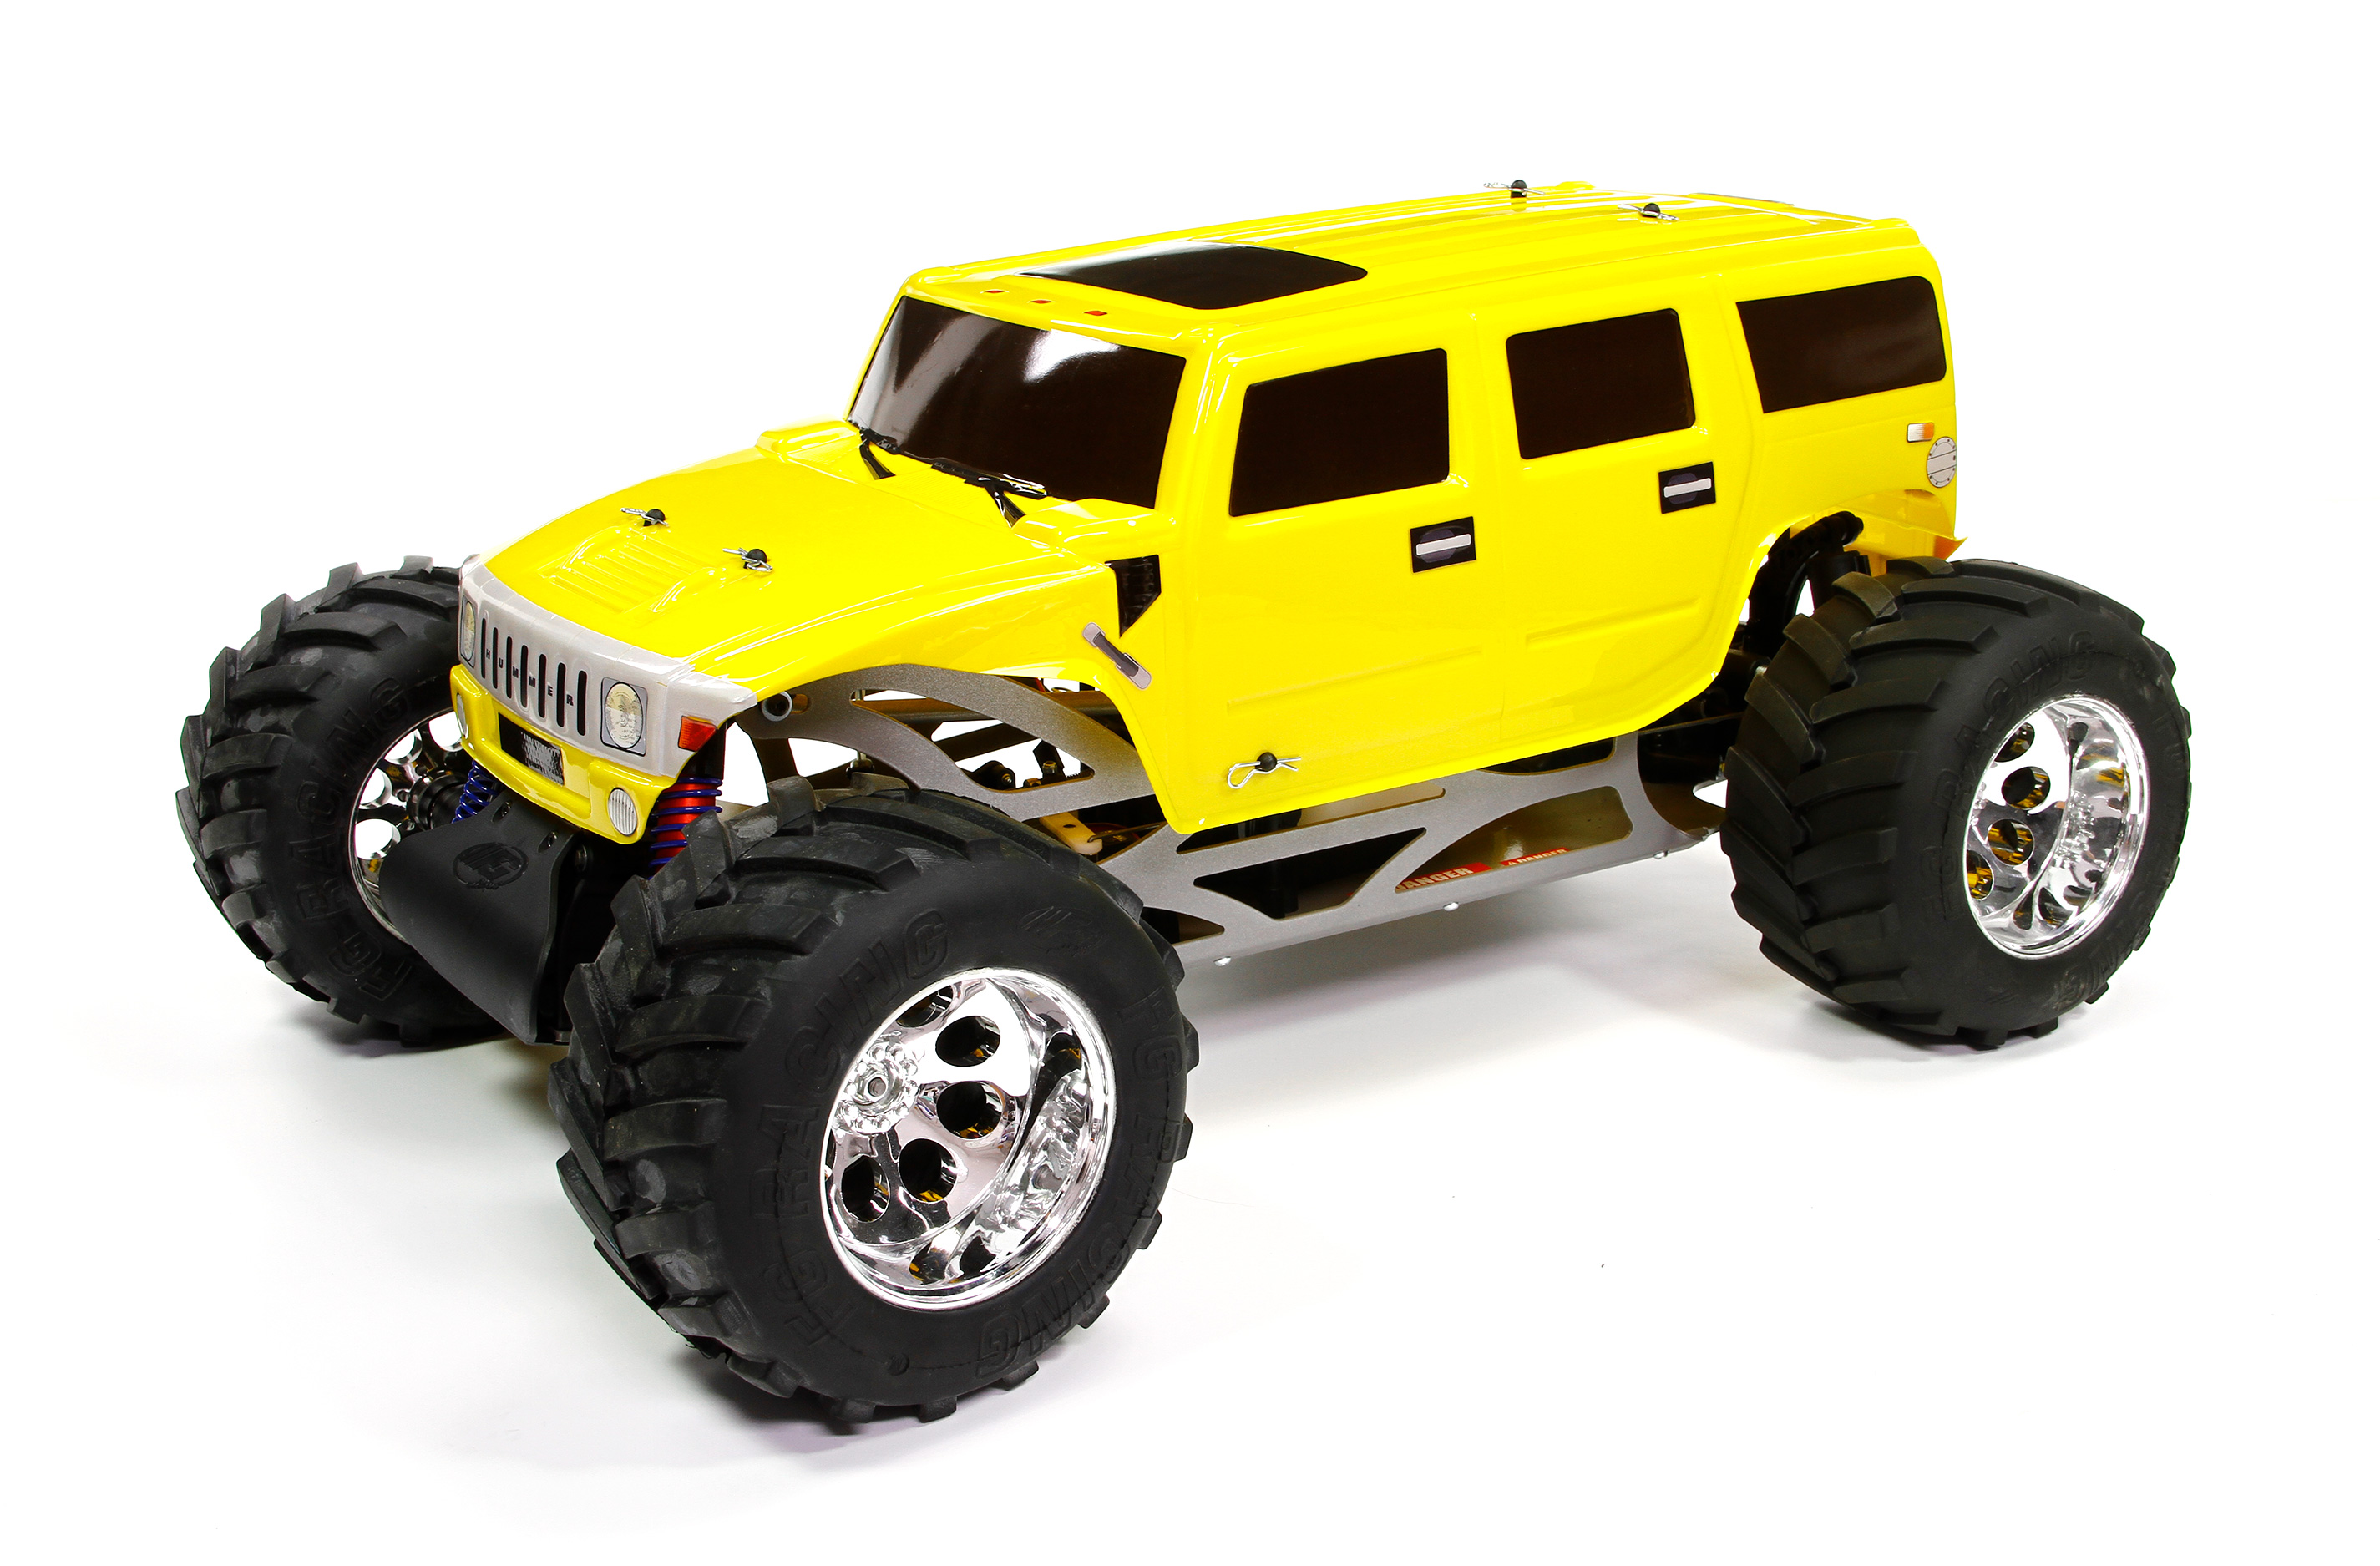 FG Monster-Hummer Electric WB535, 4WD